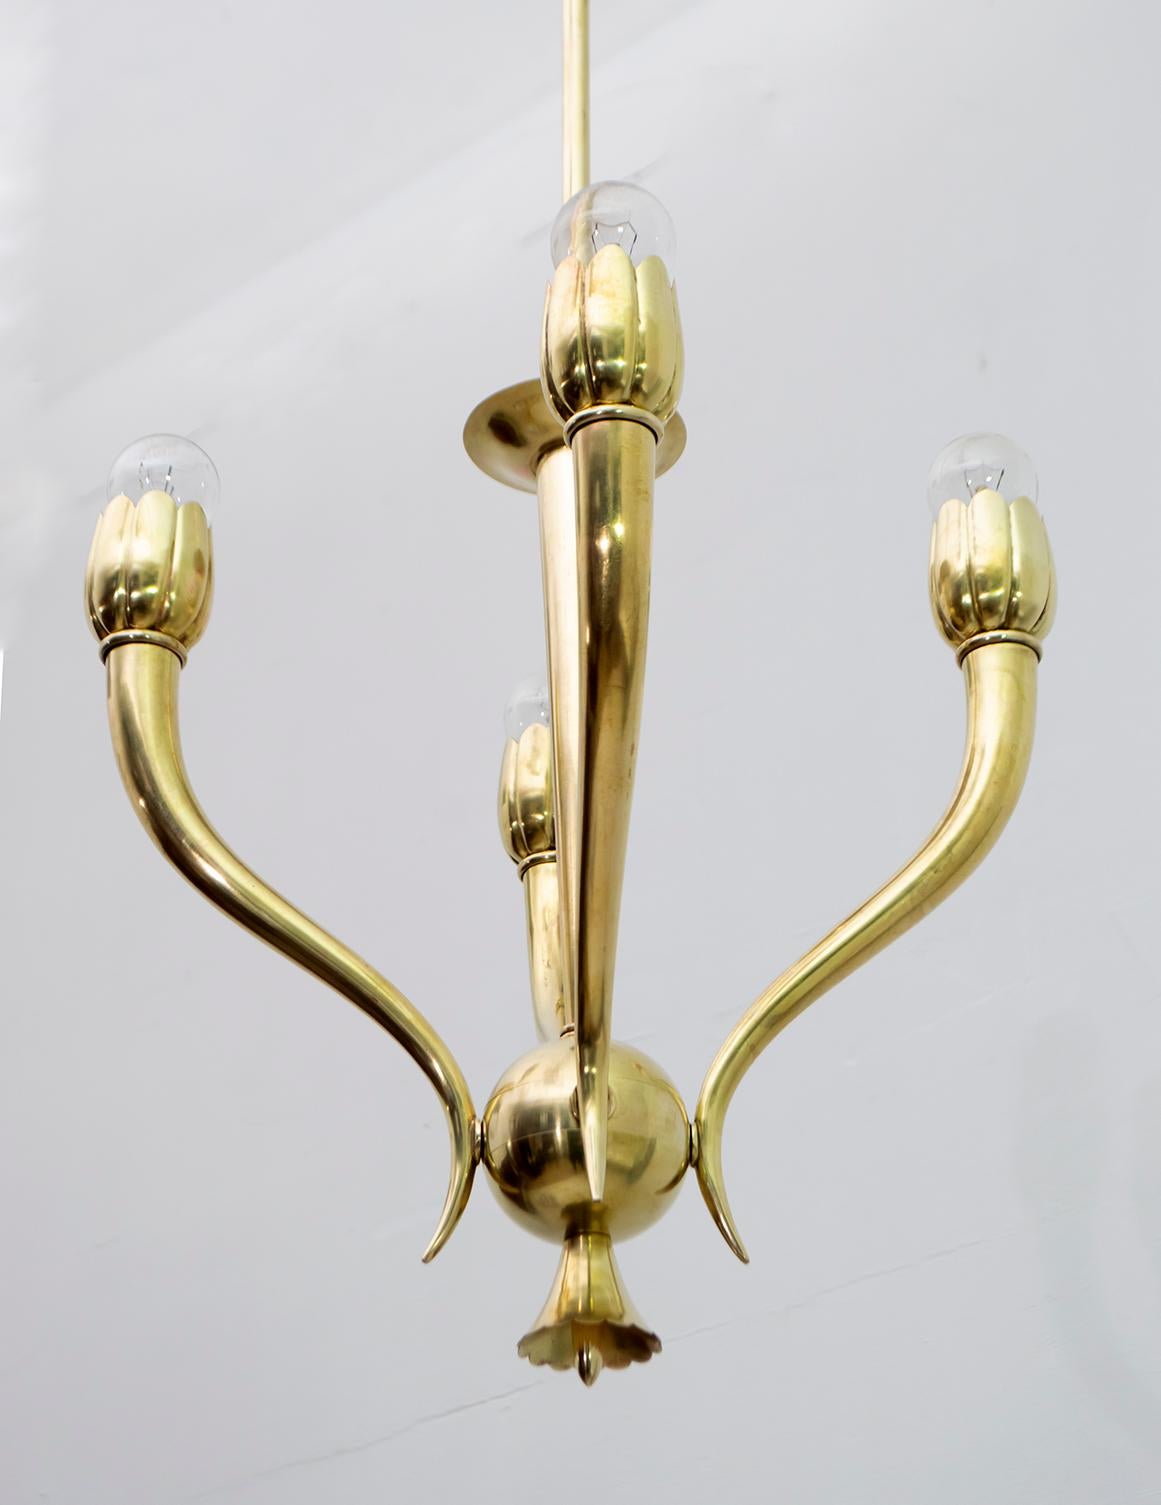 Elegant chandelier attributed to the famous architect Guglielmo Ulrich, the chandelier is made of brass and has been polished. Production from the 1940s in Art Deco style.